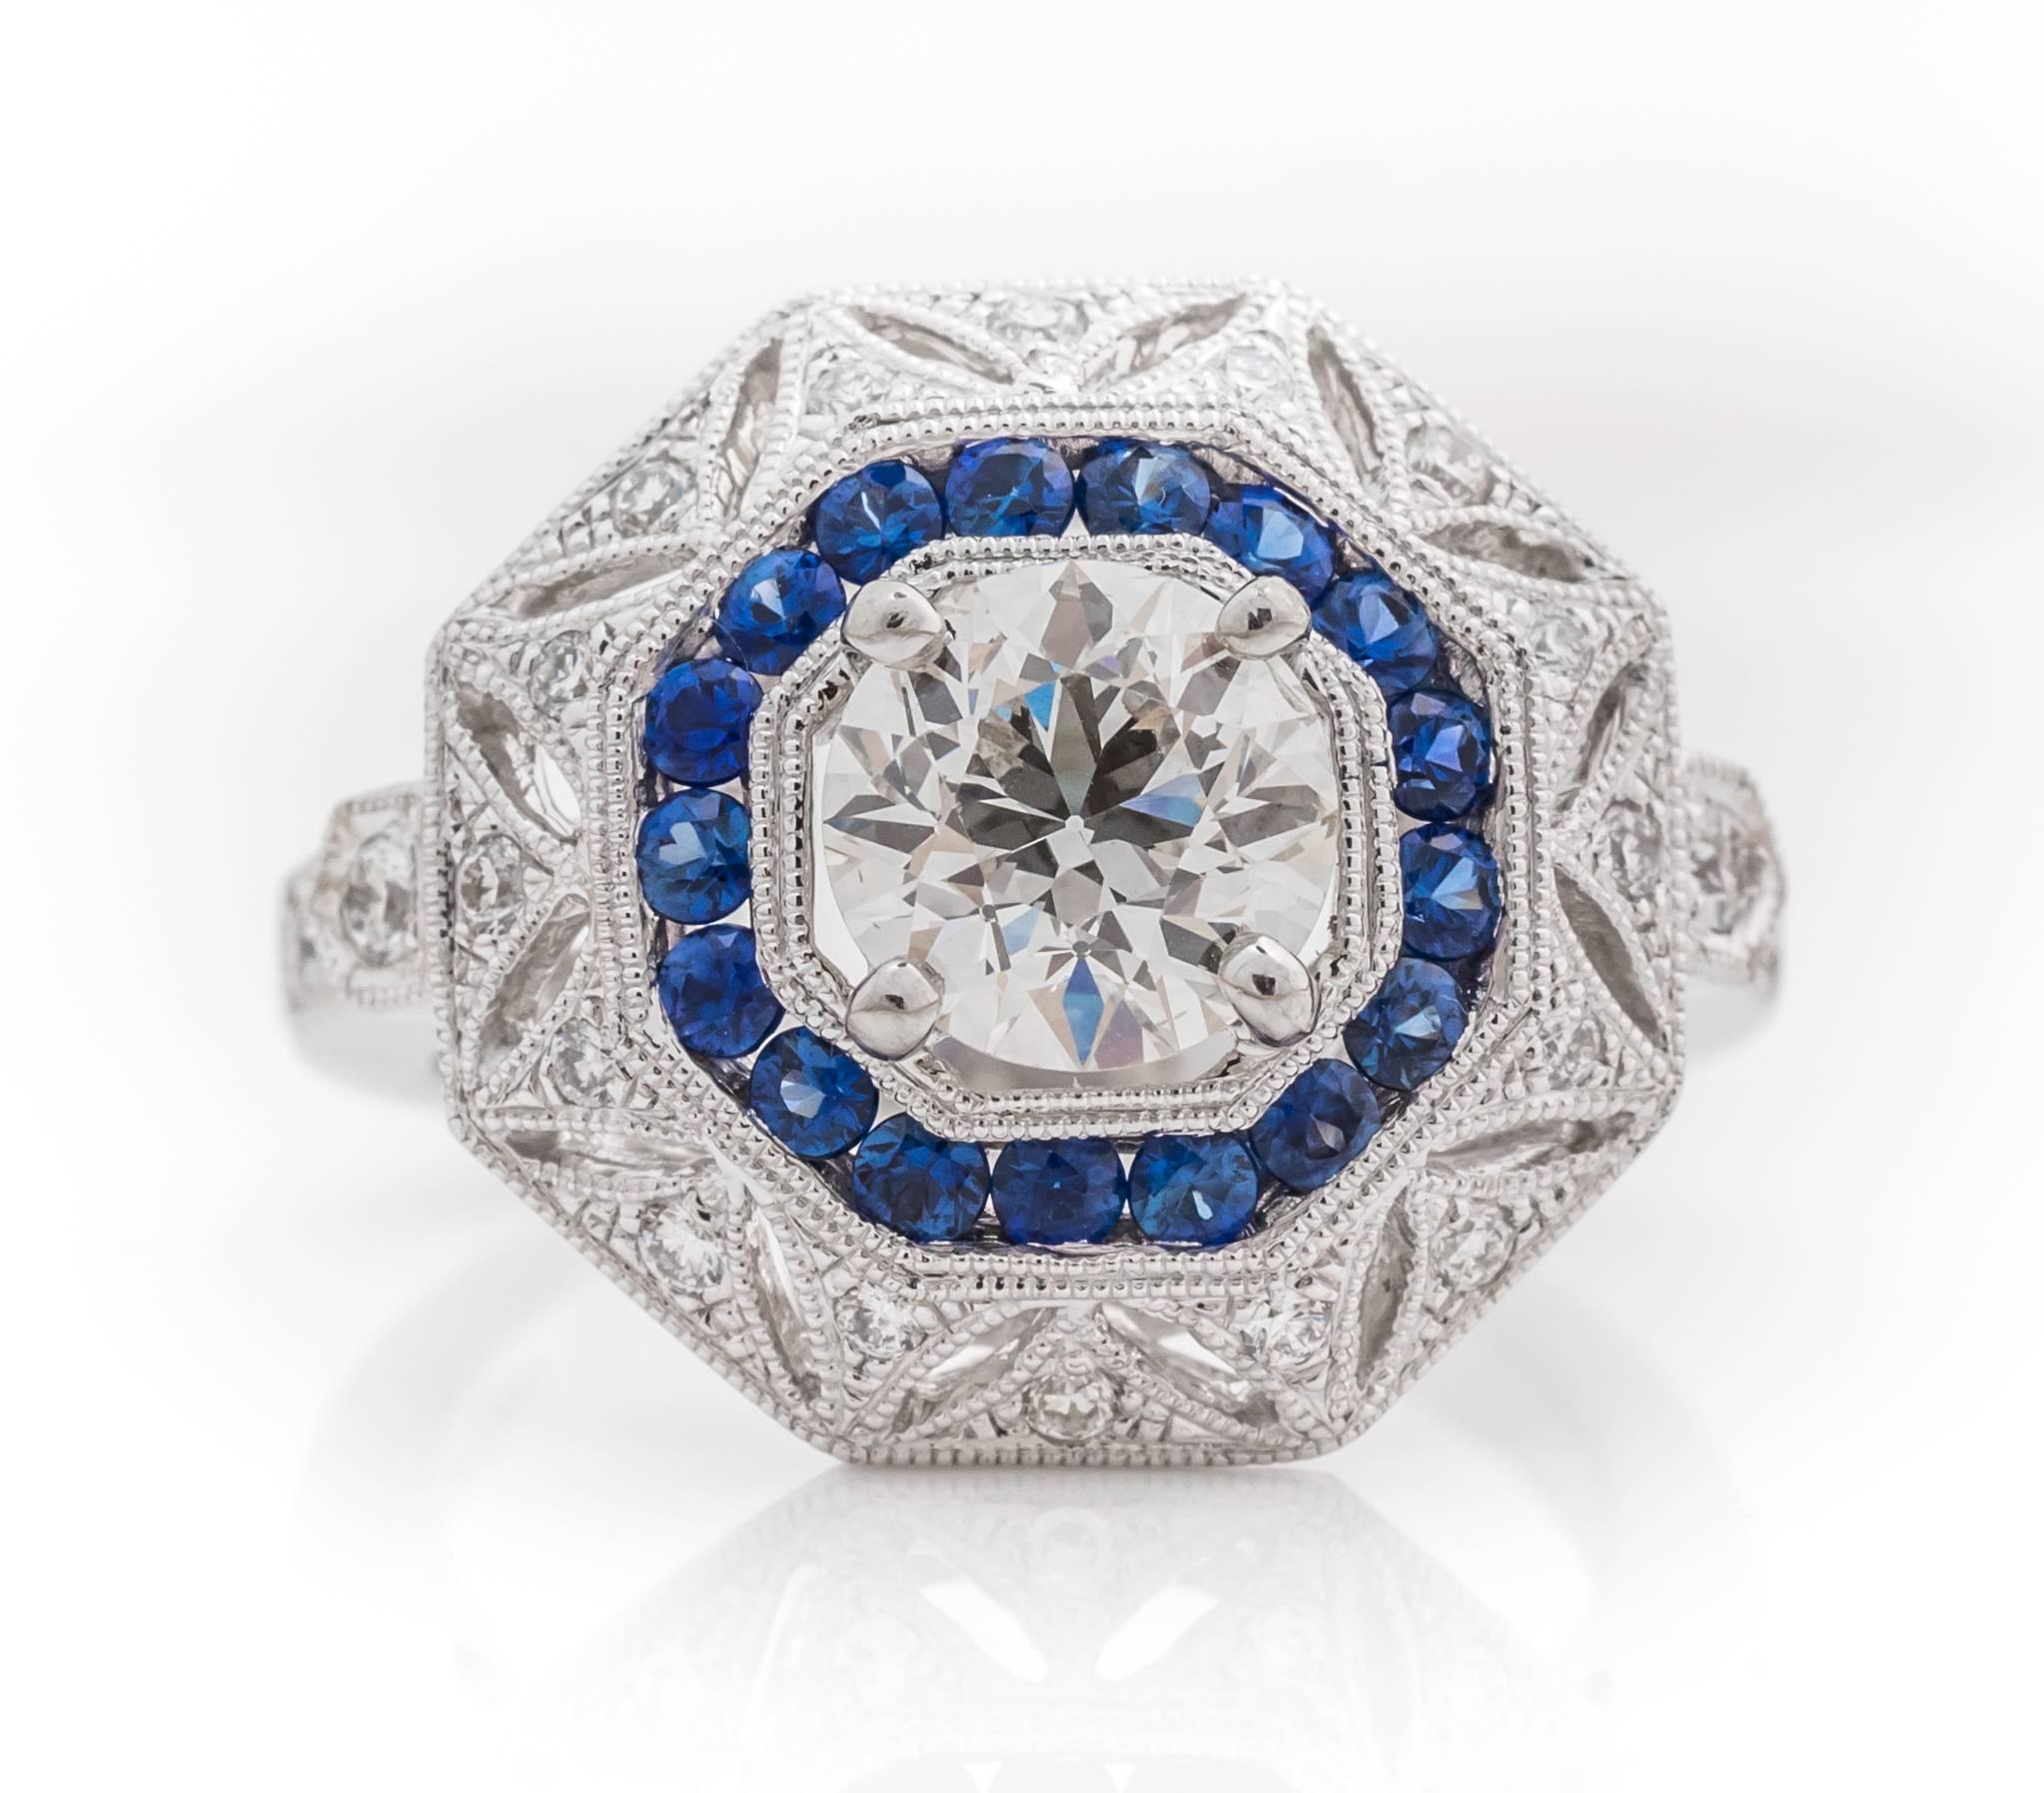 Art Deco Era Old European Diamond sitting flush in a brand new Verma Made antique-inspired mounting encrusted in accent diamonds and sapphires! 

Metal Details:
Type: Platinum
Weight: 11 Grams
Ring Size: 6
Hallmark visible: PT900 for platinum
